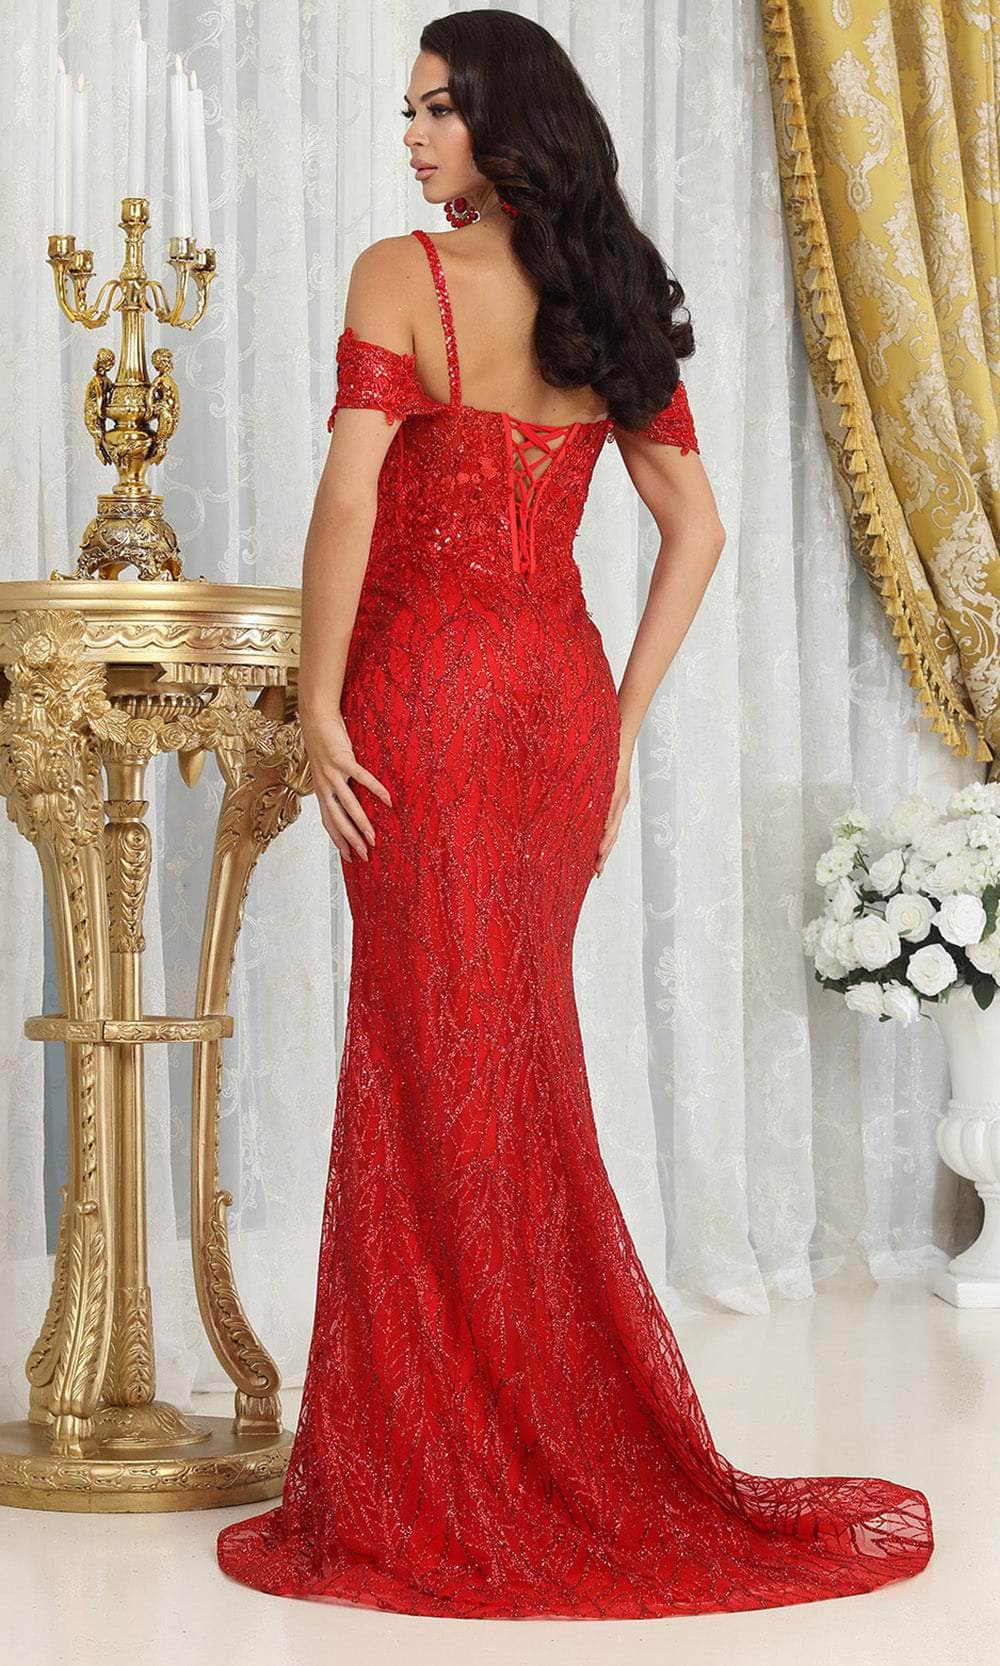 May Queen RQ8094 - Draped Sleeve V-Neck Prom Gown Prom Dresses